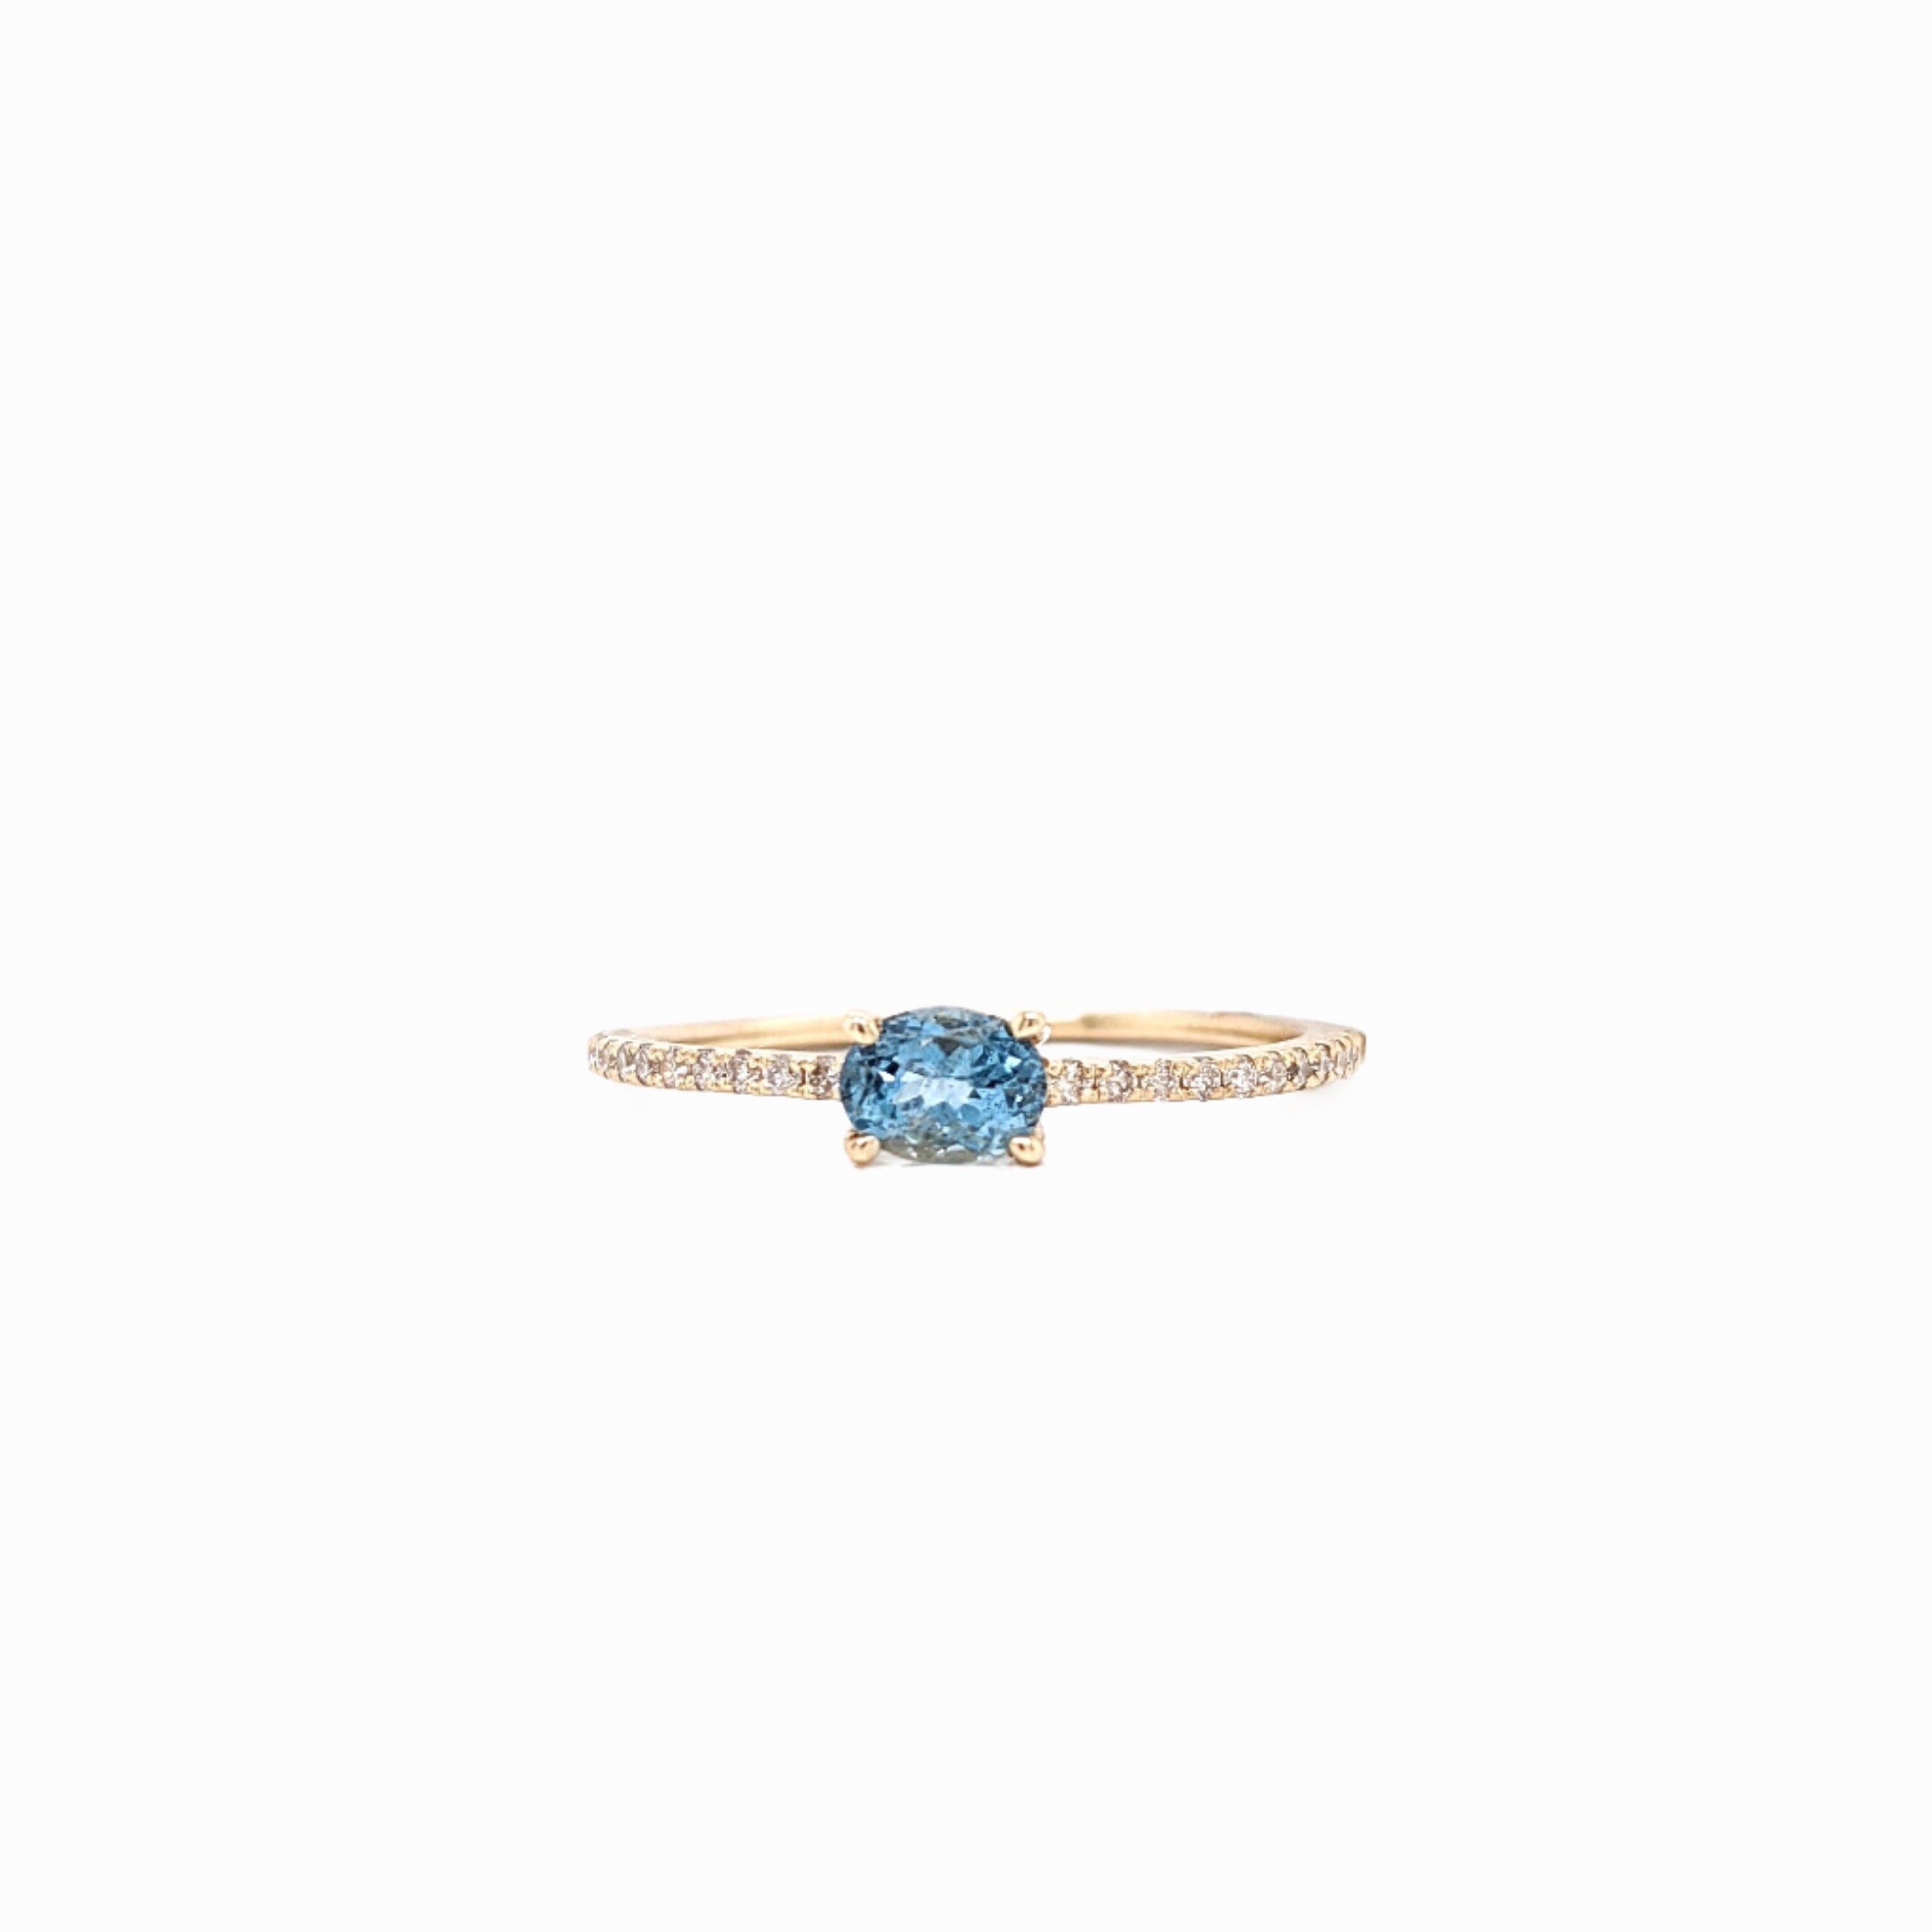 East West Minimalist Aqua Blue Natural Aquamarine Ring in 14k Gold w Natural Diamond Pave Shank | Oval 4x3mm | March Birthstone | Stackable